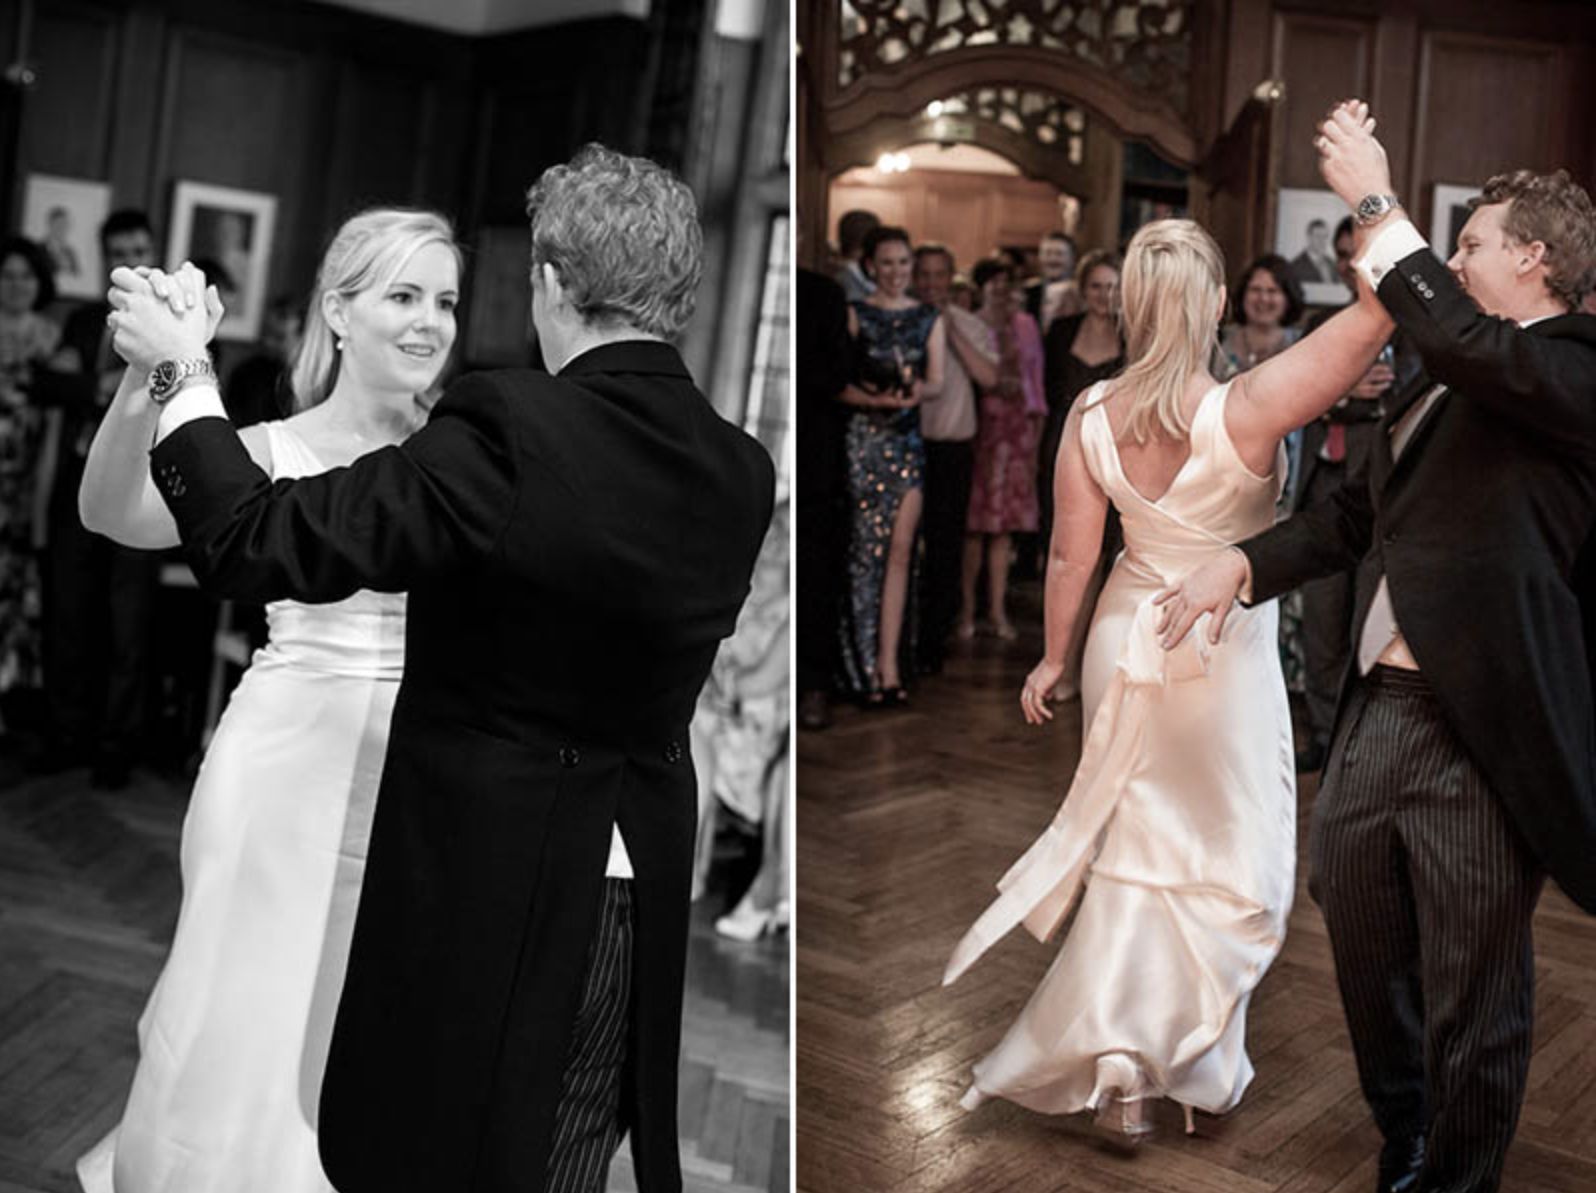 6 Tips For Rocking The Dance Floor On Your Wedding Day